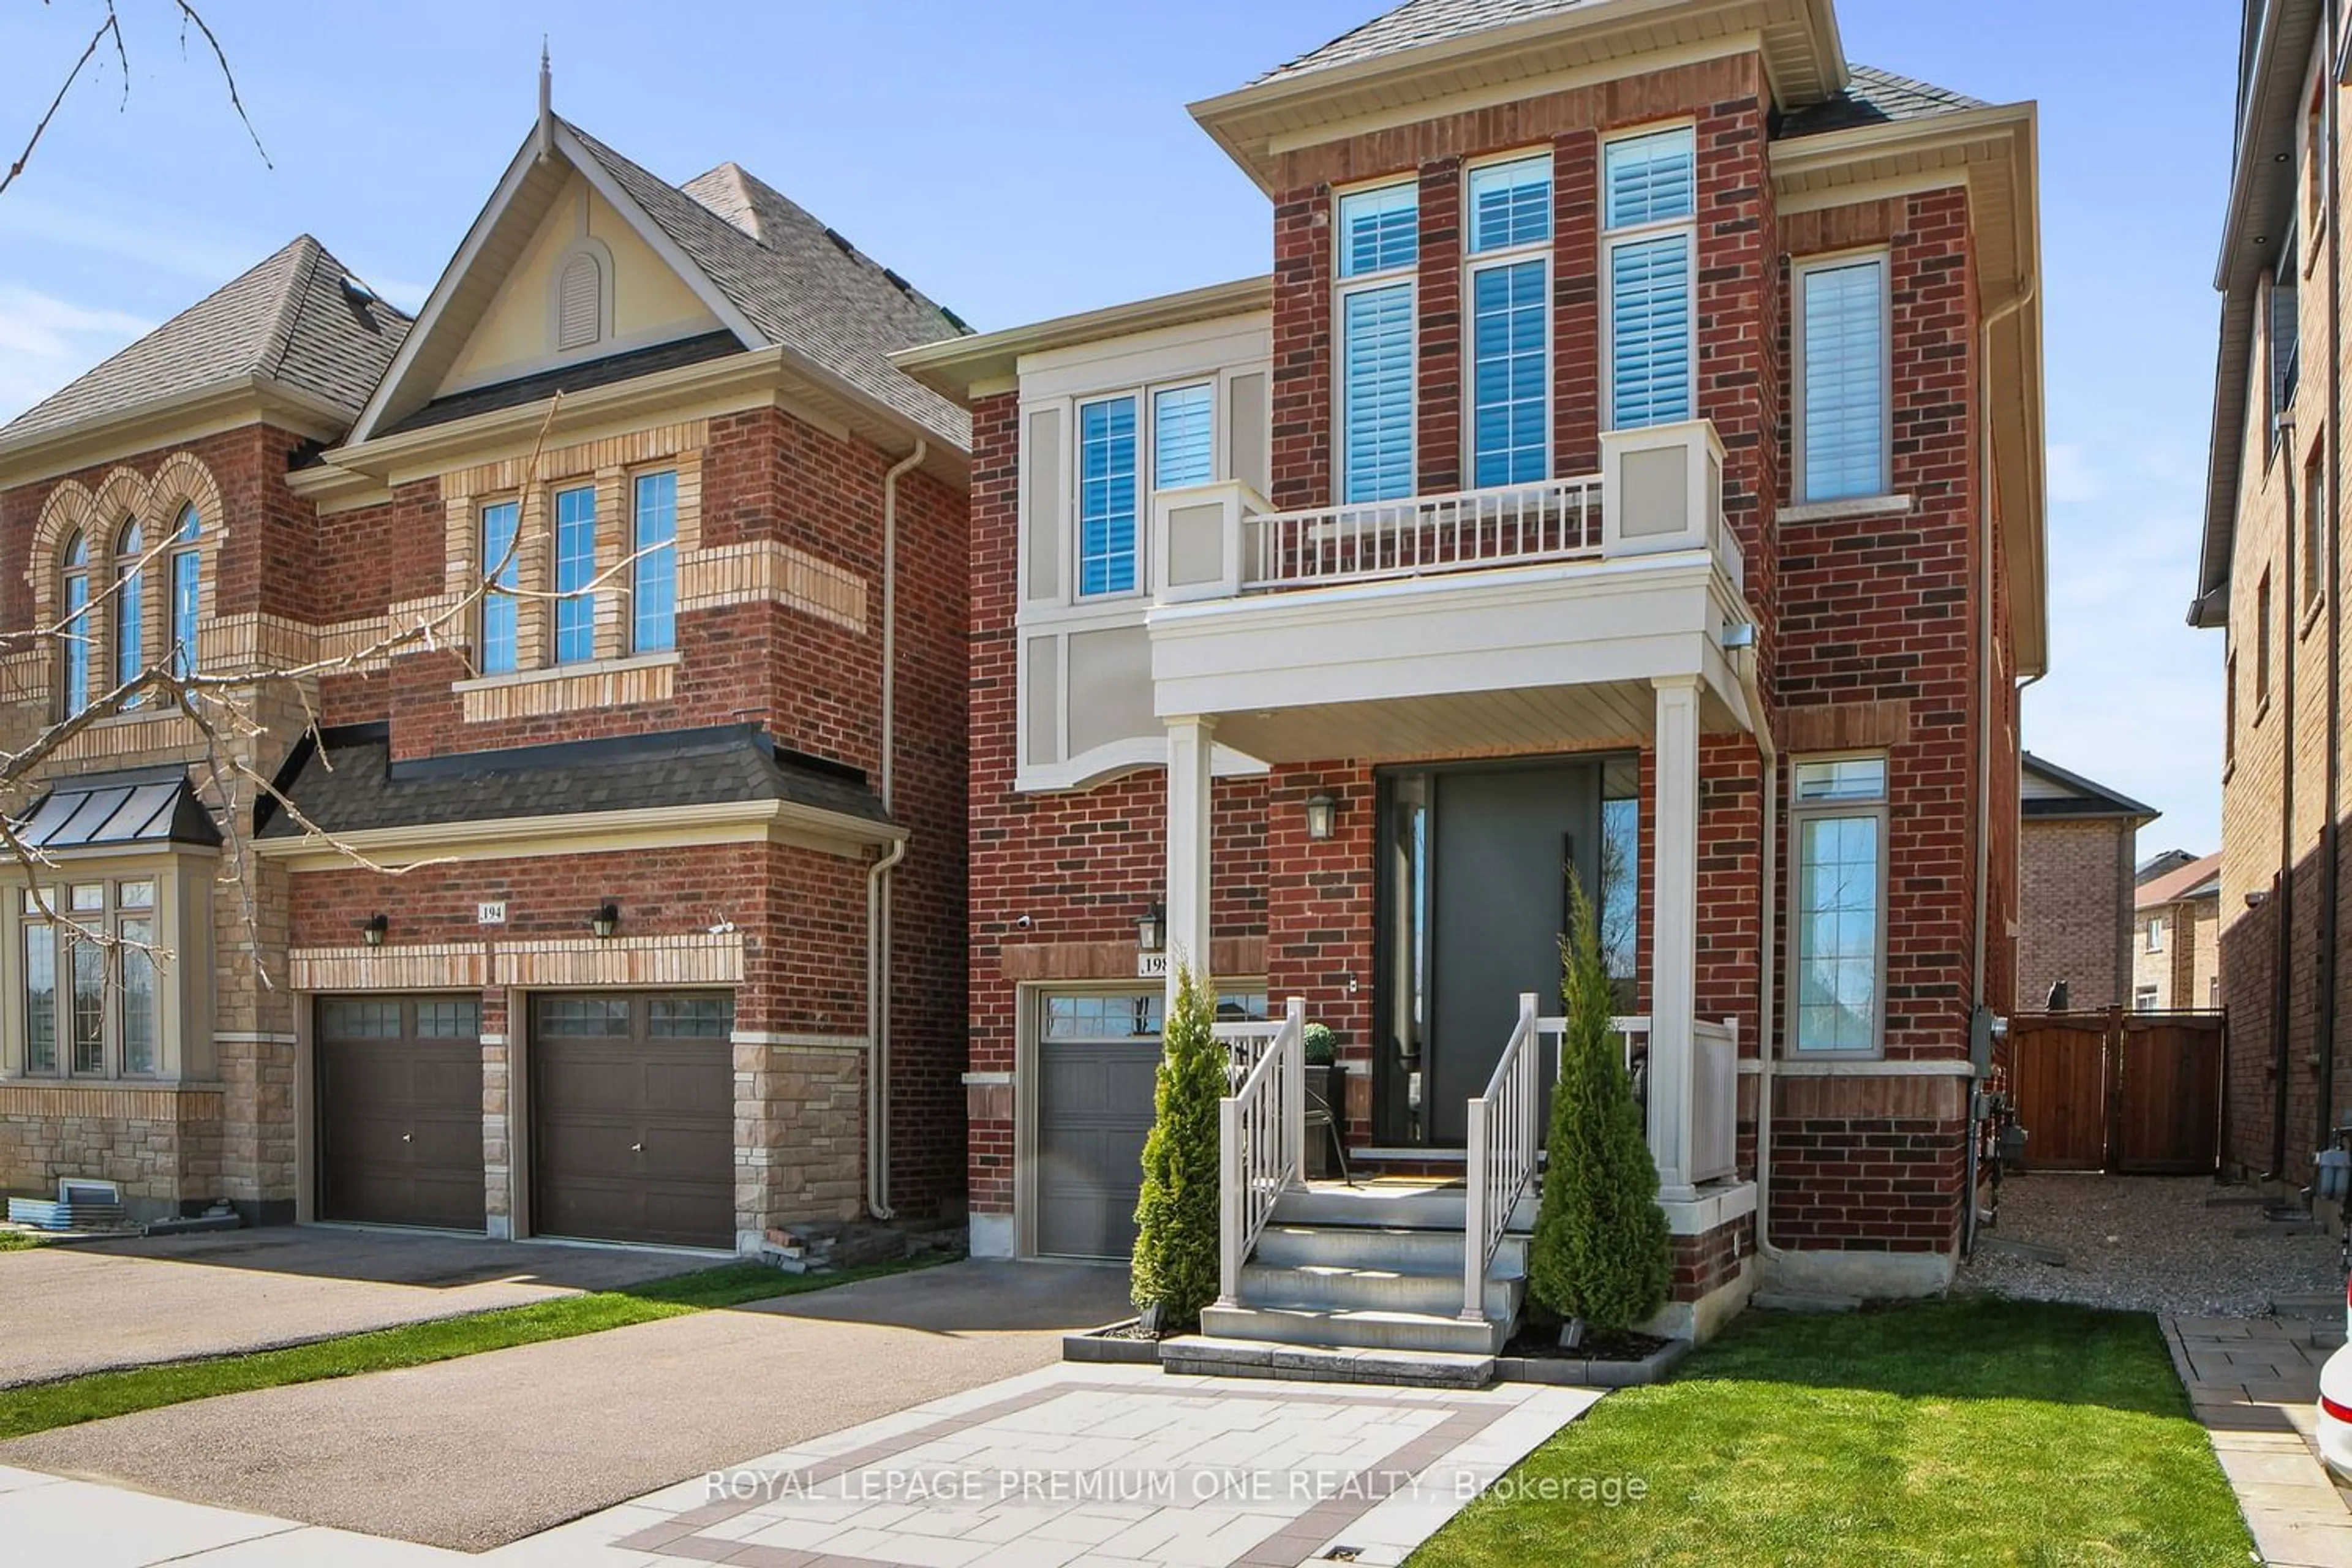 Home with brick exterior material for 198 Mactier Dr, Vaughan Ontario L4H 4L5